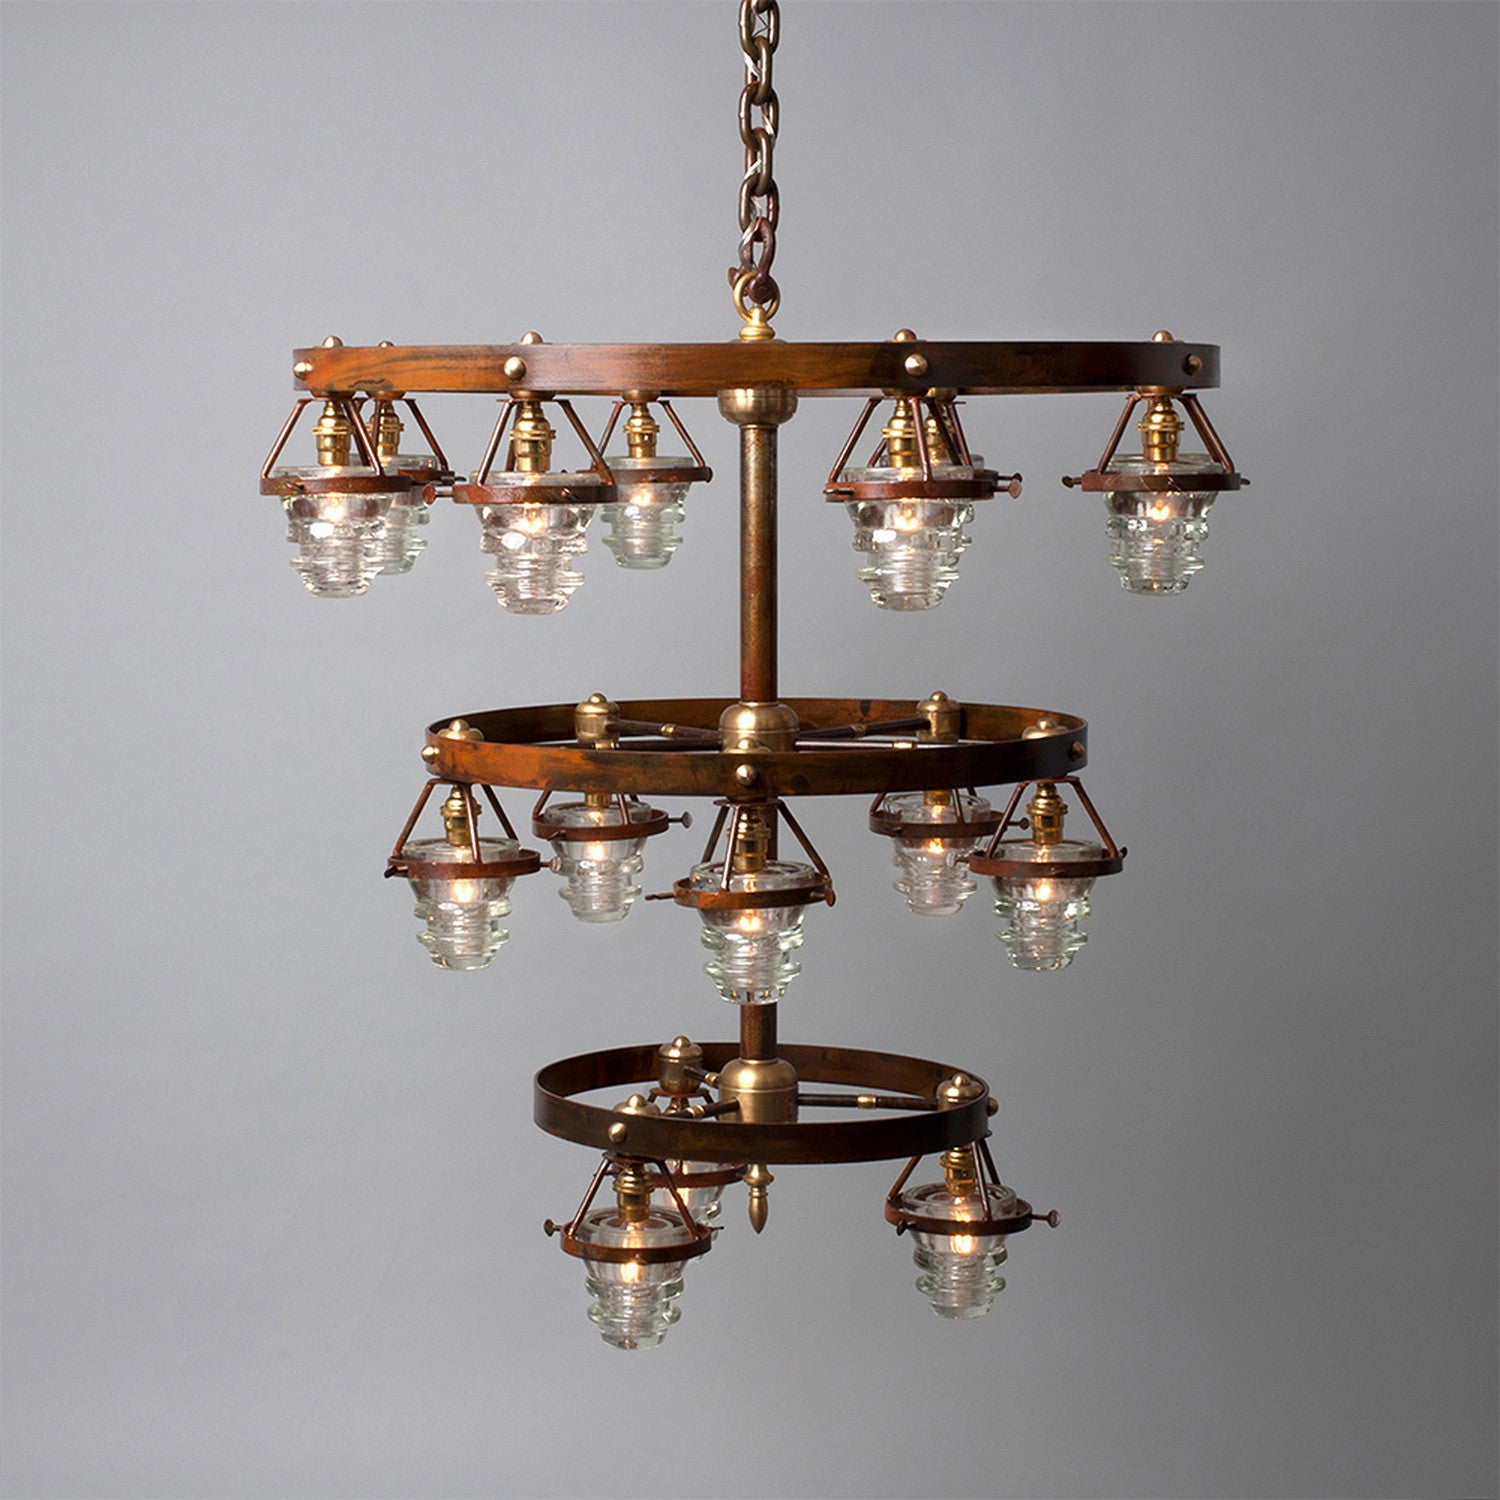 Two-tiered circular Triple Telegraph Chandelier with antique glass insulators, exposed bulbs, and bronze finish by Hester &amp; Cook.